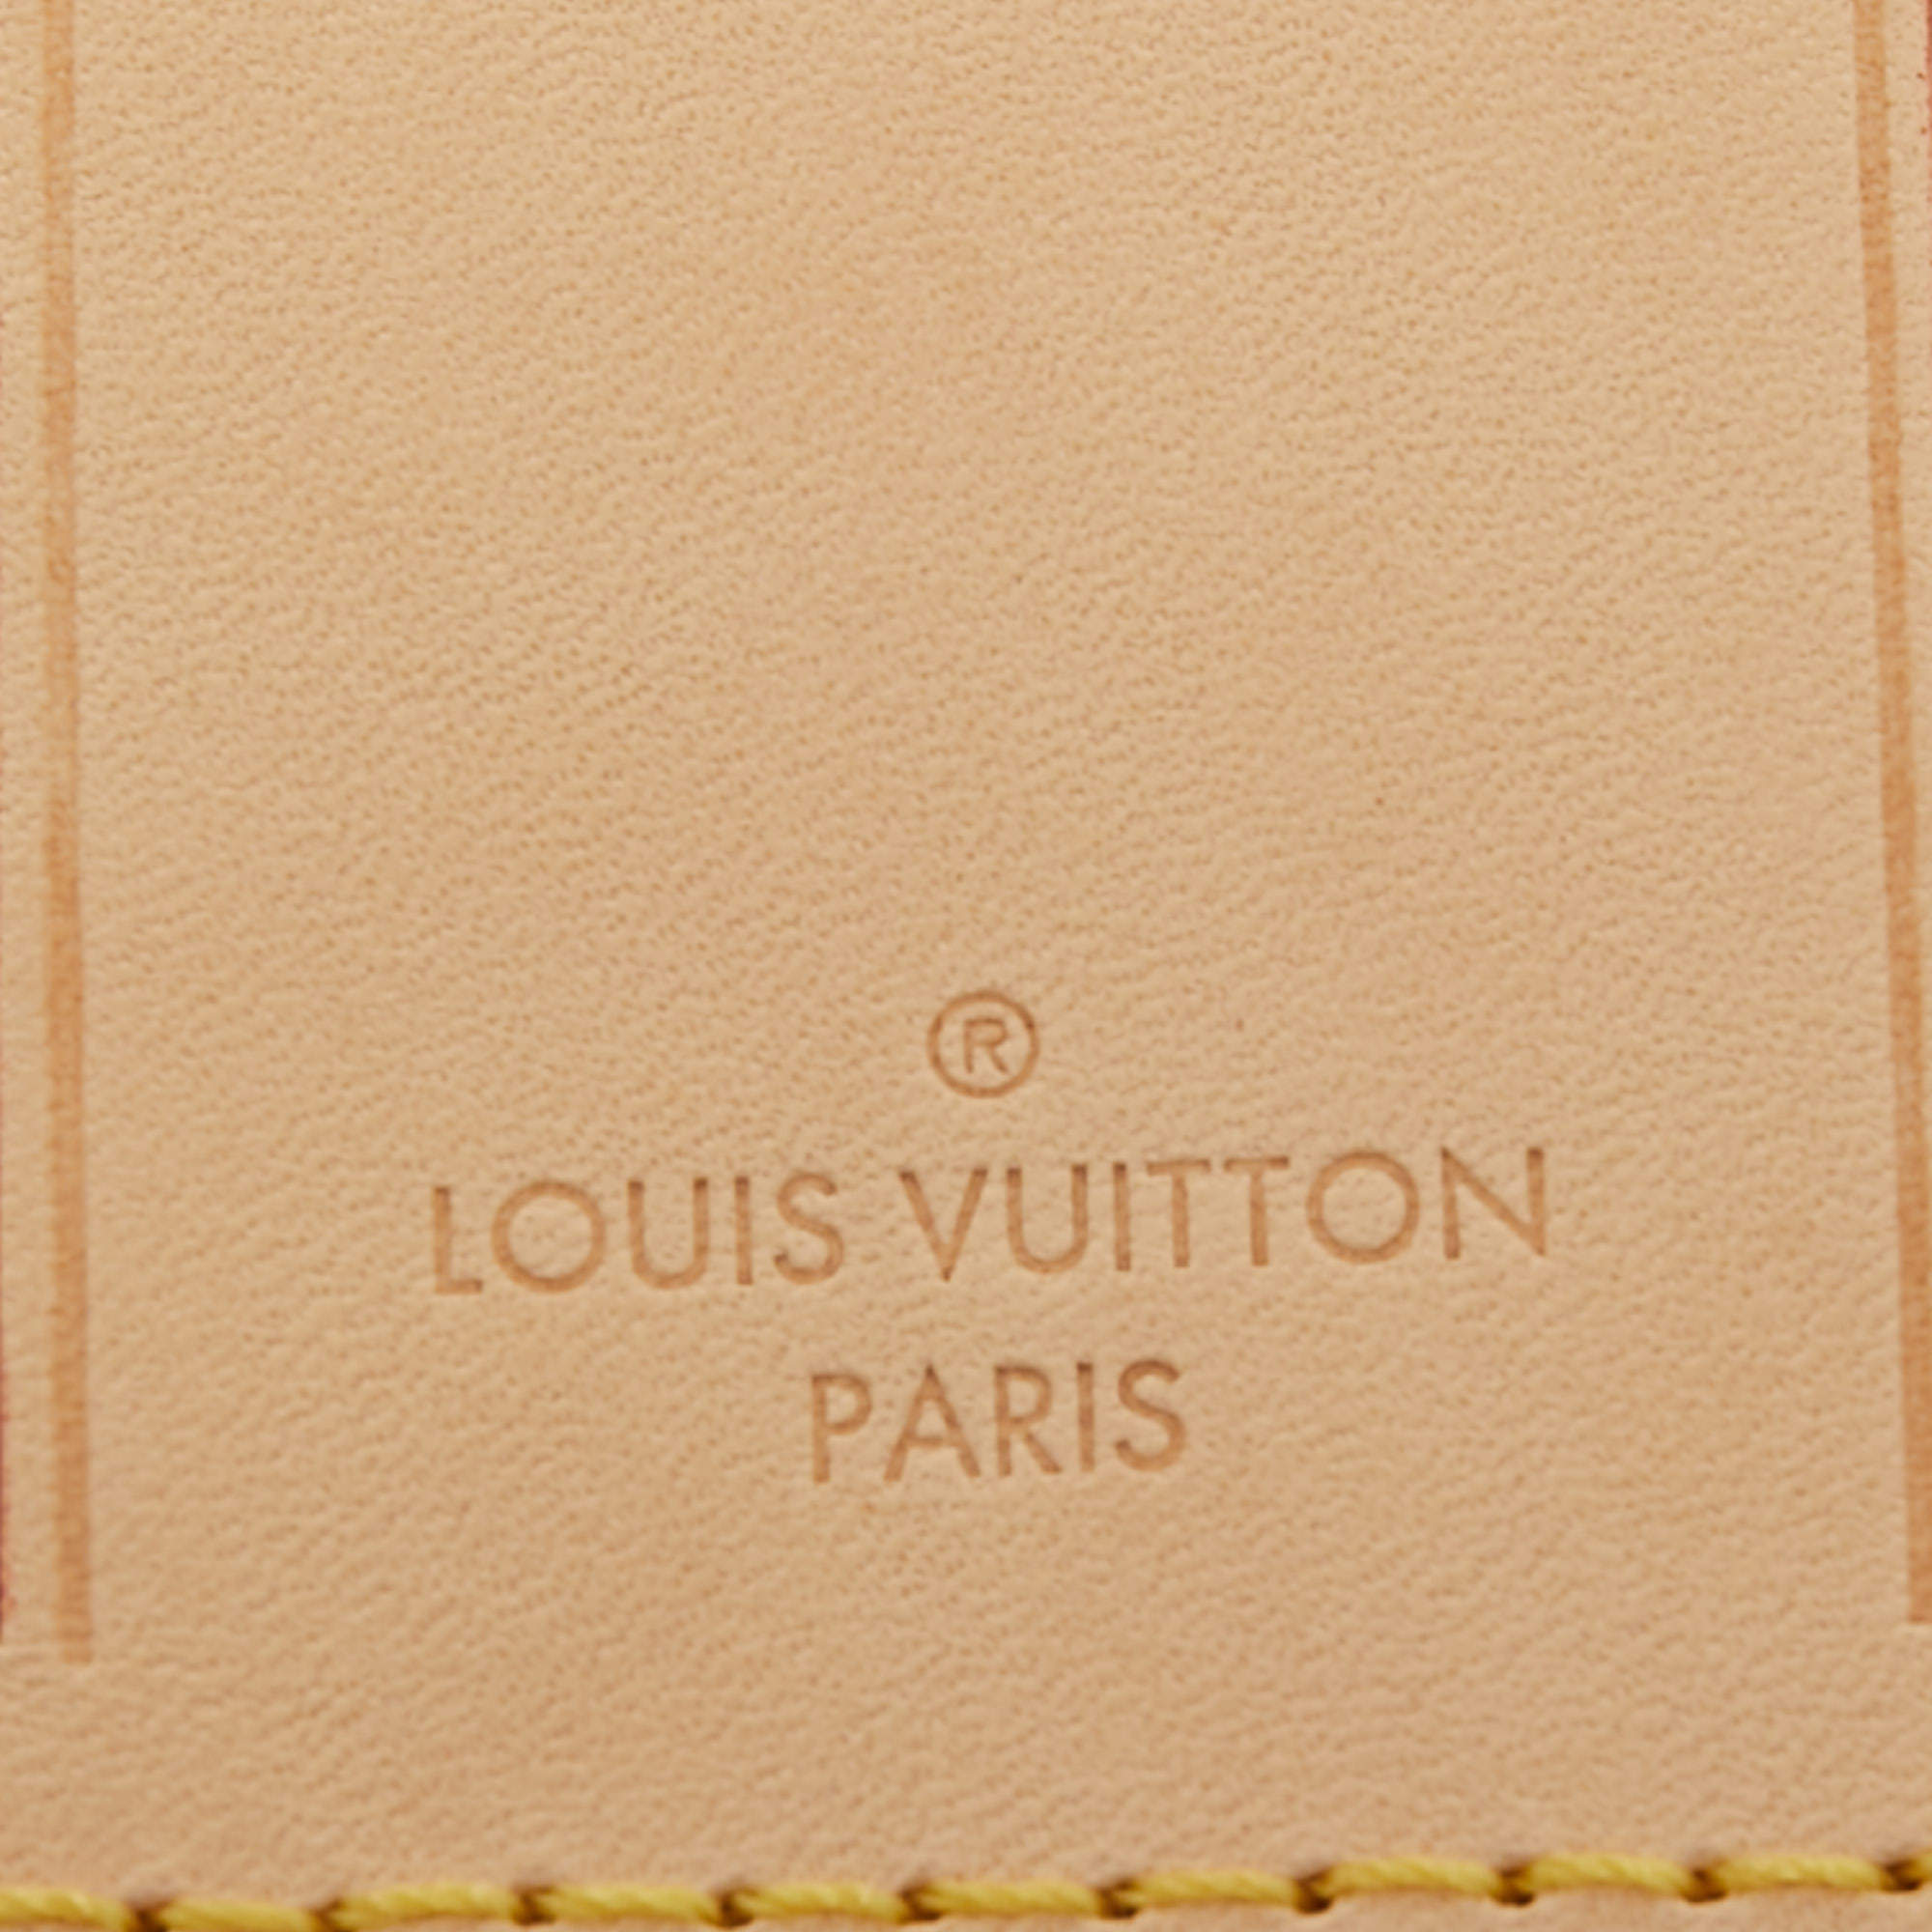 Louis Vuitton Vachetta Leather Luggage Tag and Poignet 151lvs25 –  Bagriculture